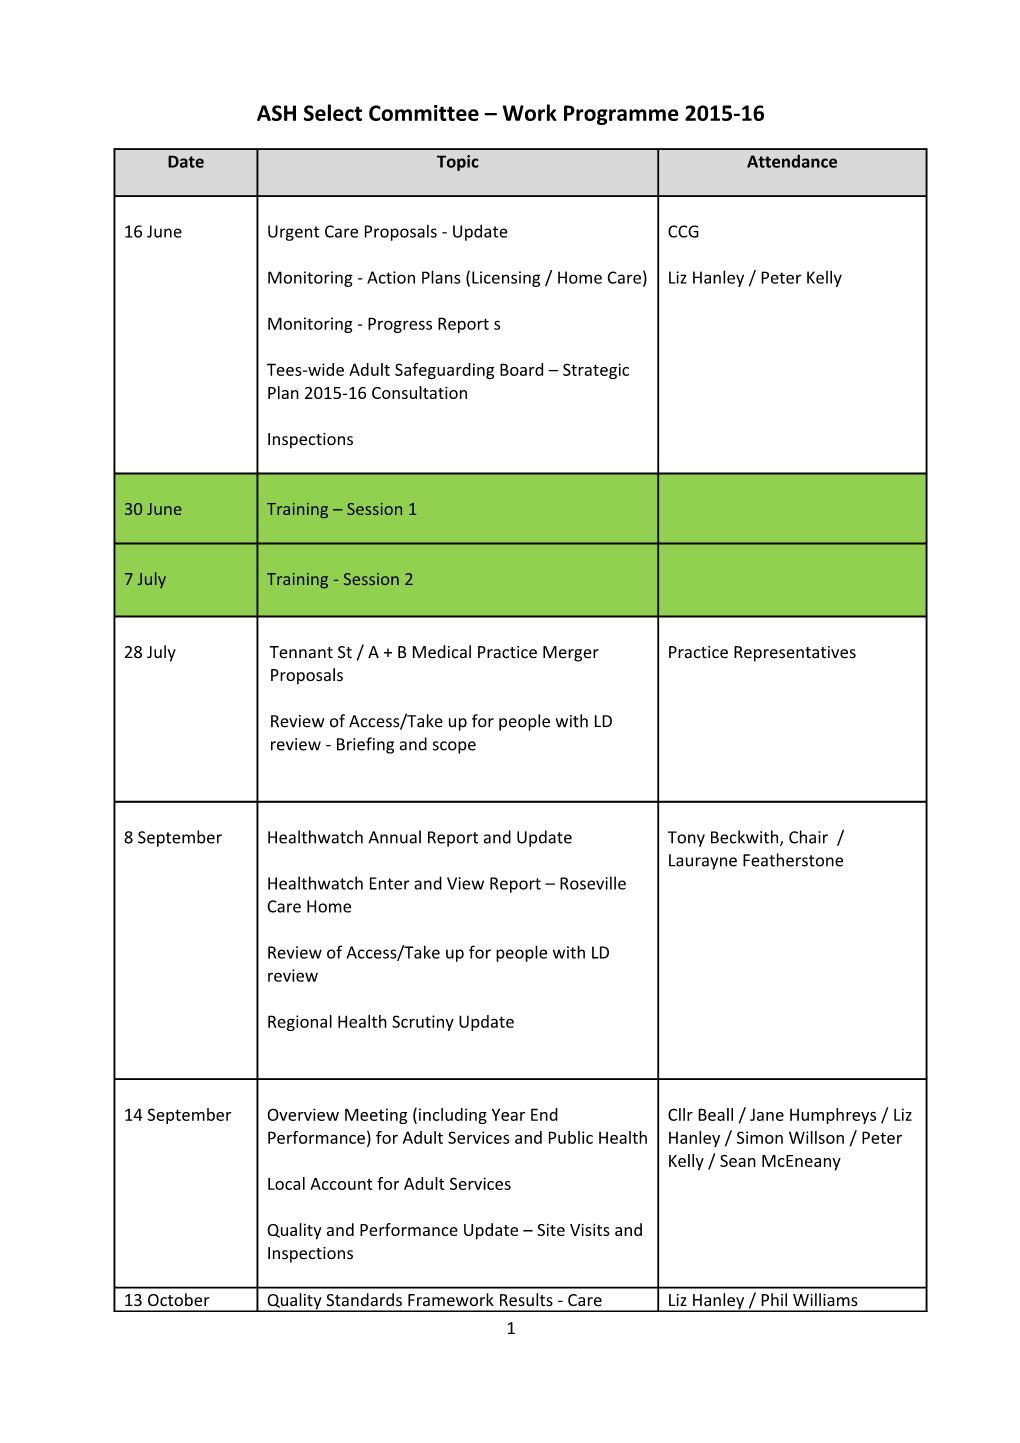 ASH Select Committee Work Programme 2015-16